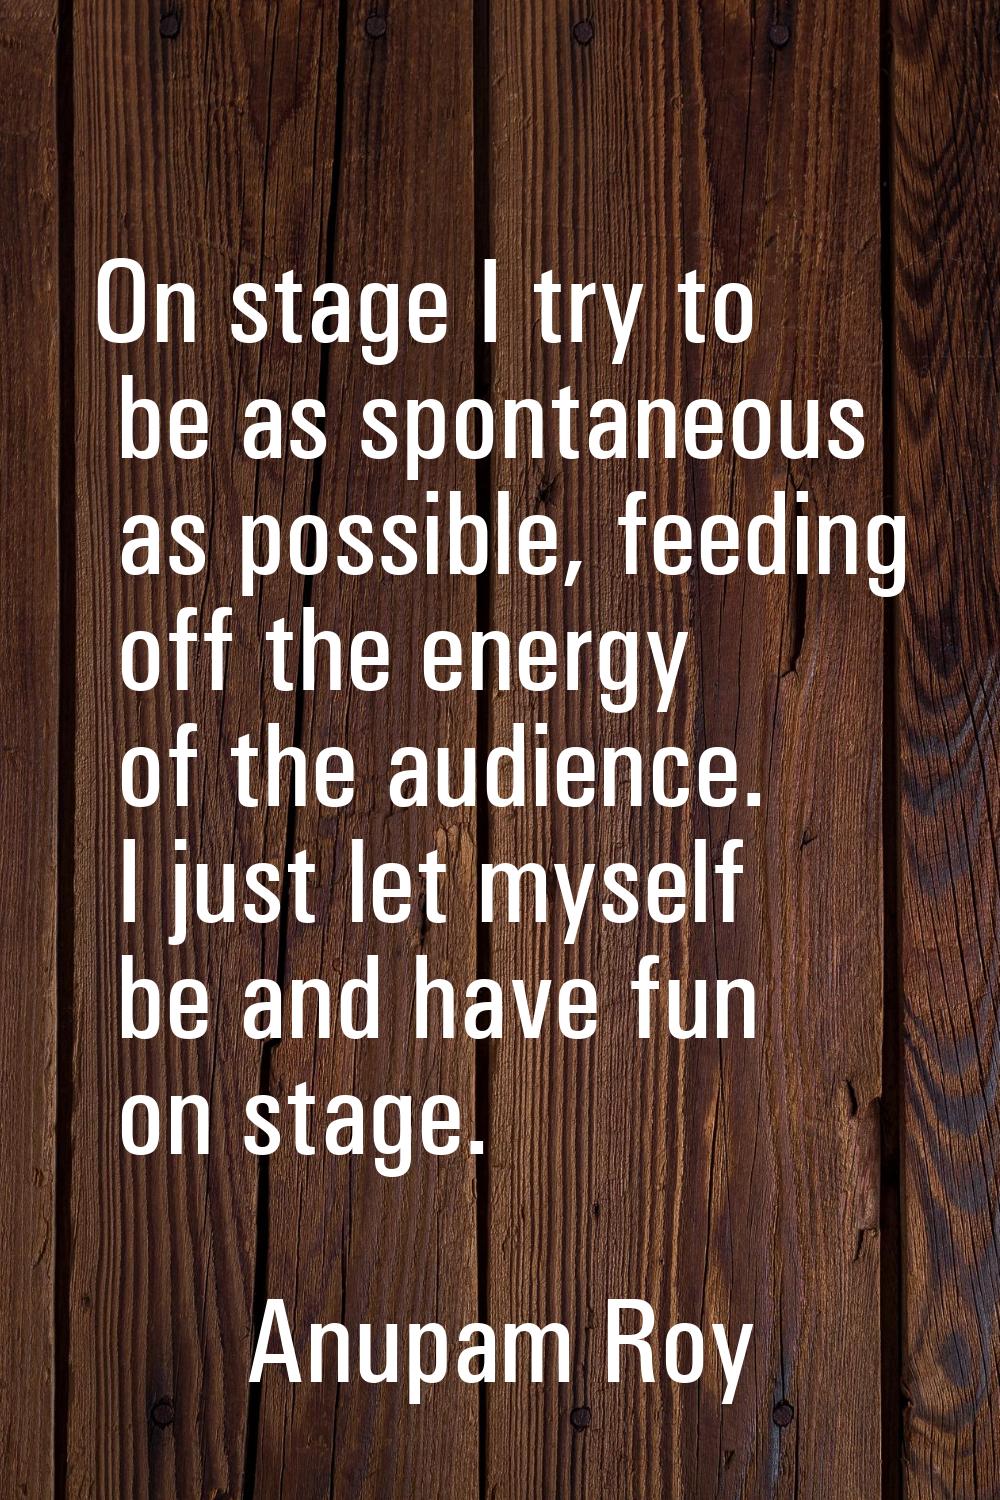 On stage I try to be as spontaneous as possible, feeding off the energy of the audience. I just let